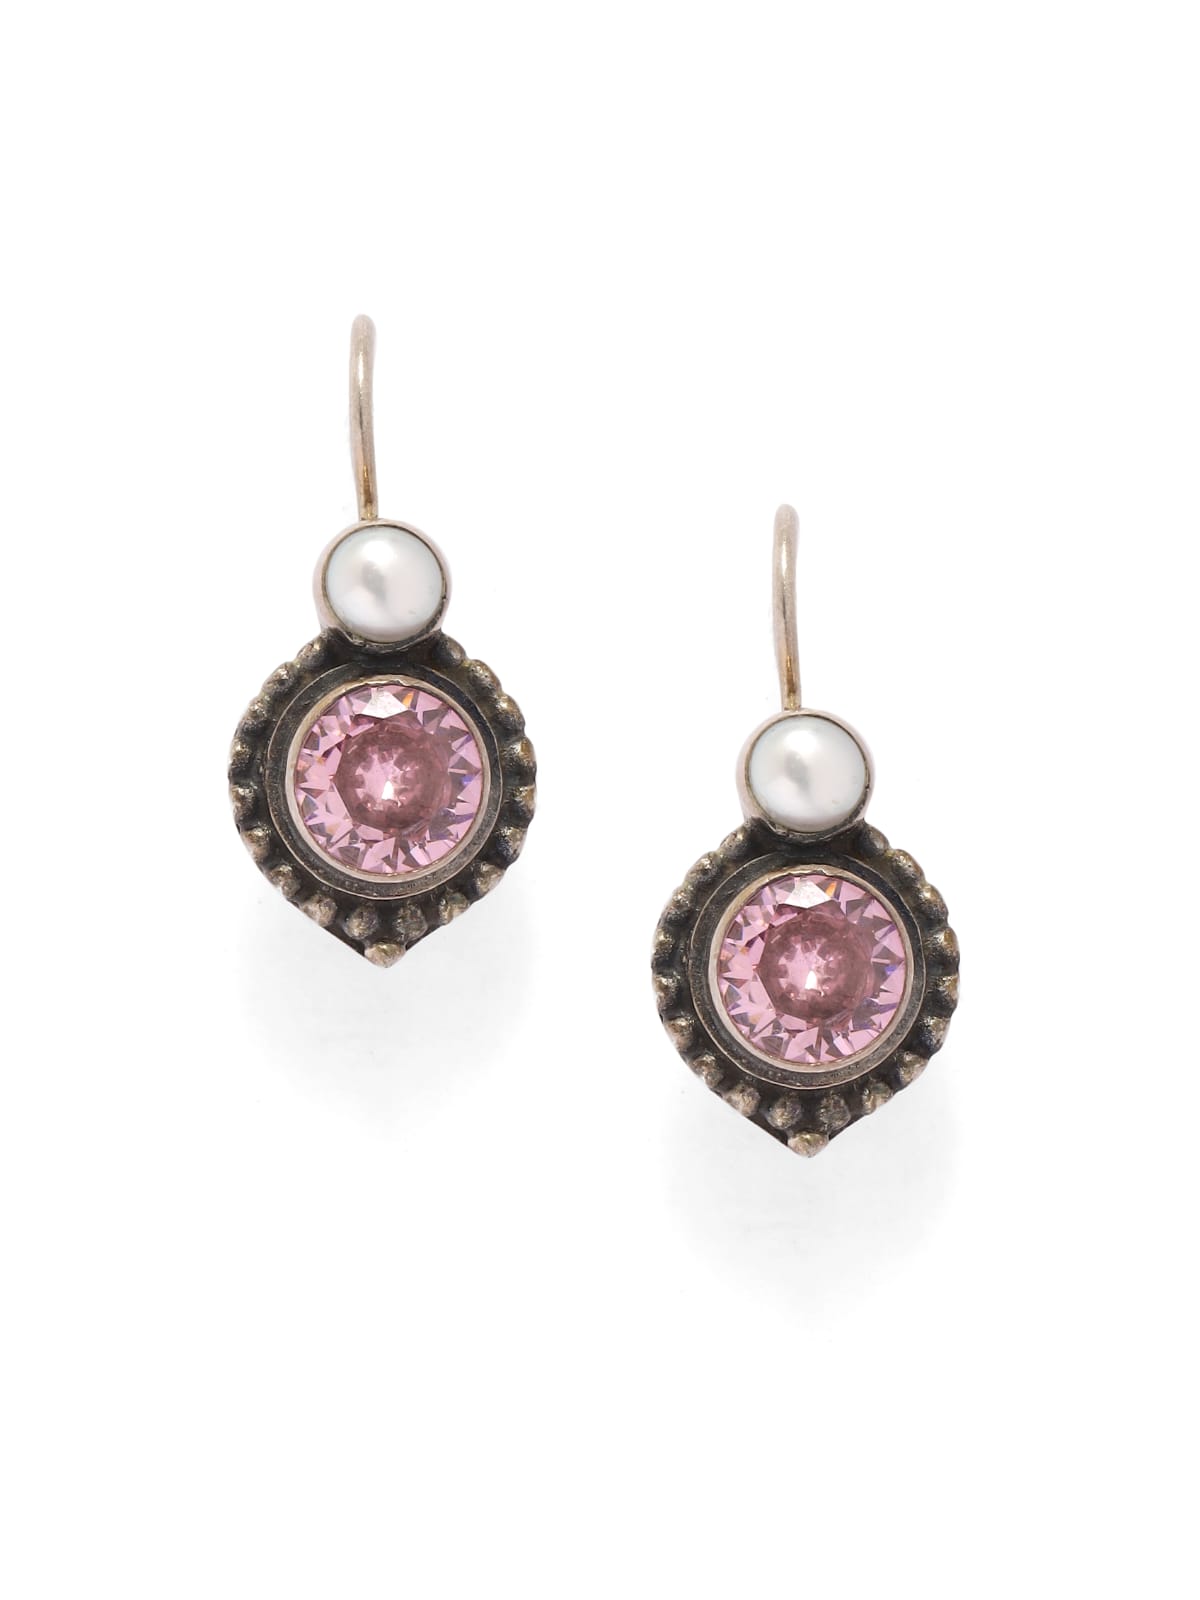 Sterling Silver hook earrings with Pearls and faceted cubic Zirconia in Oxidised plating.